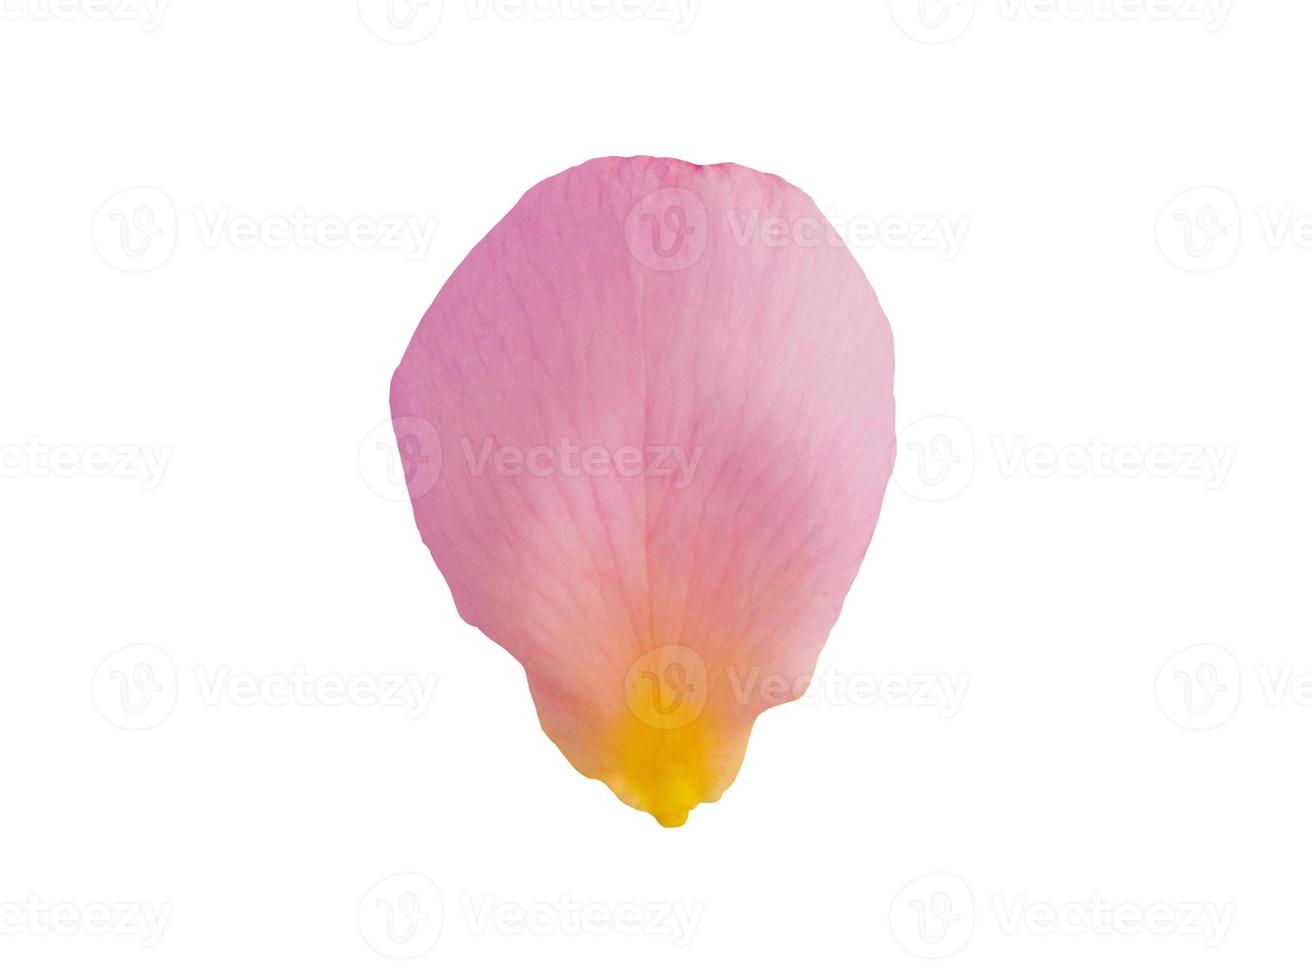 Pink rose petals isolated on white background with clipping path photo